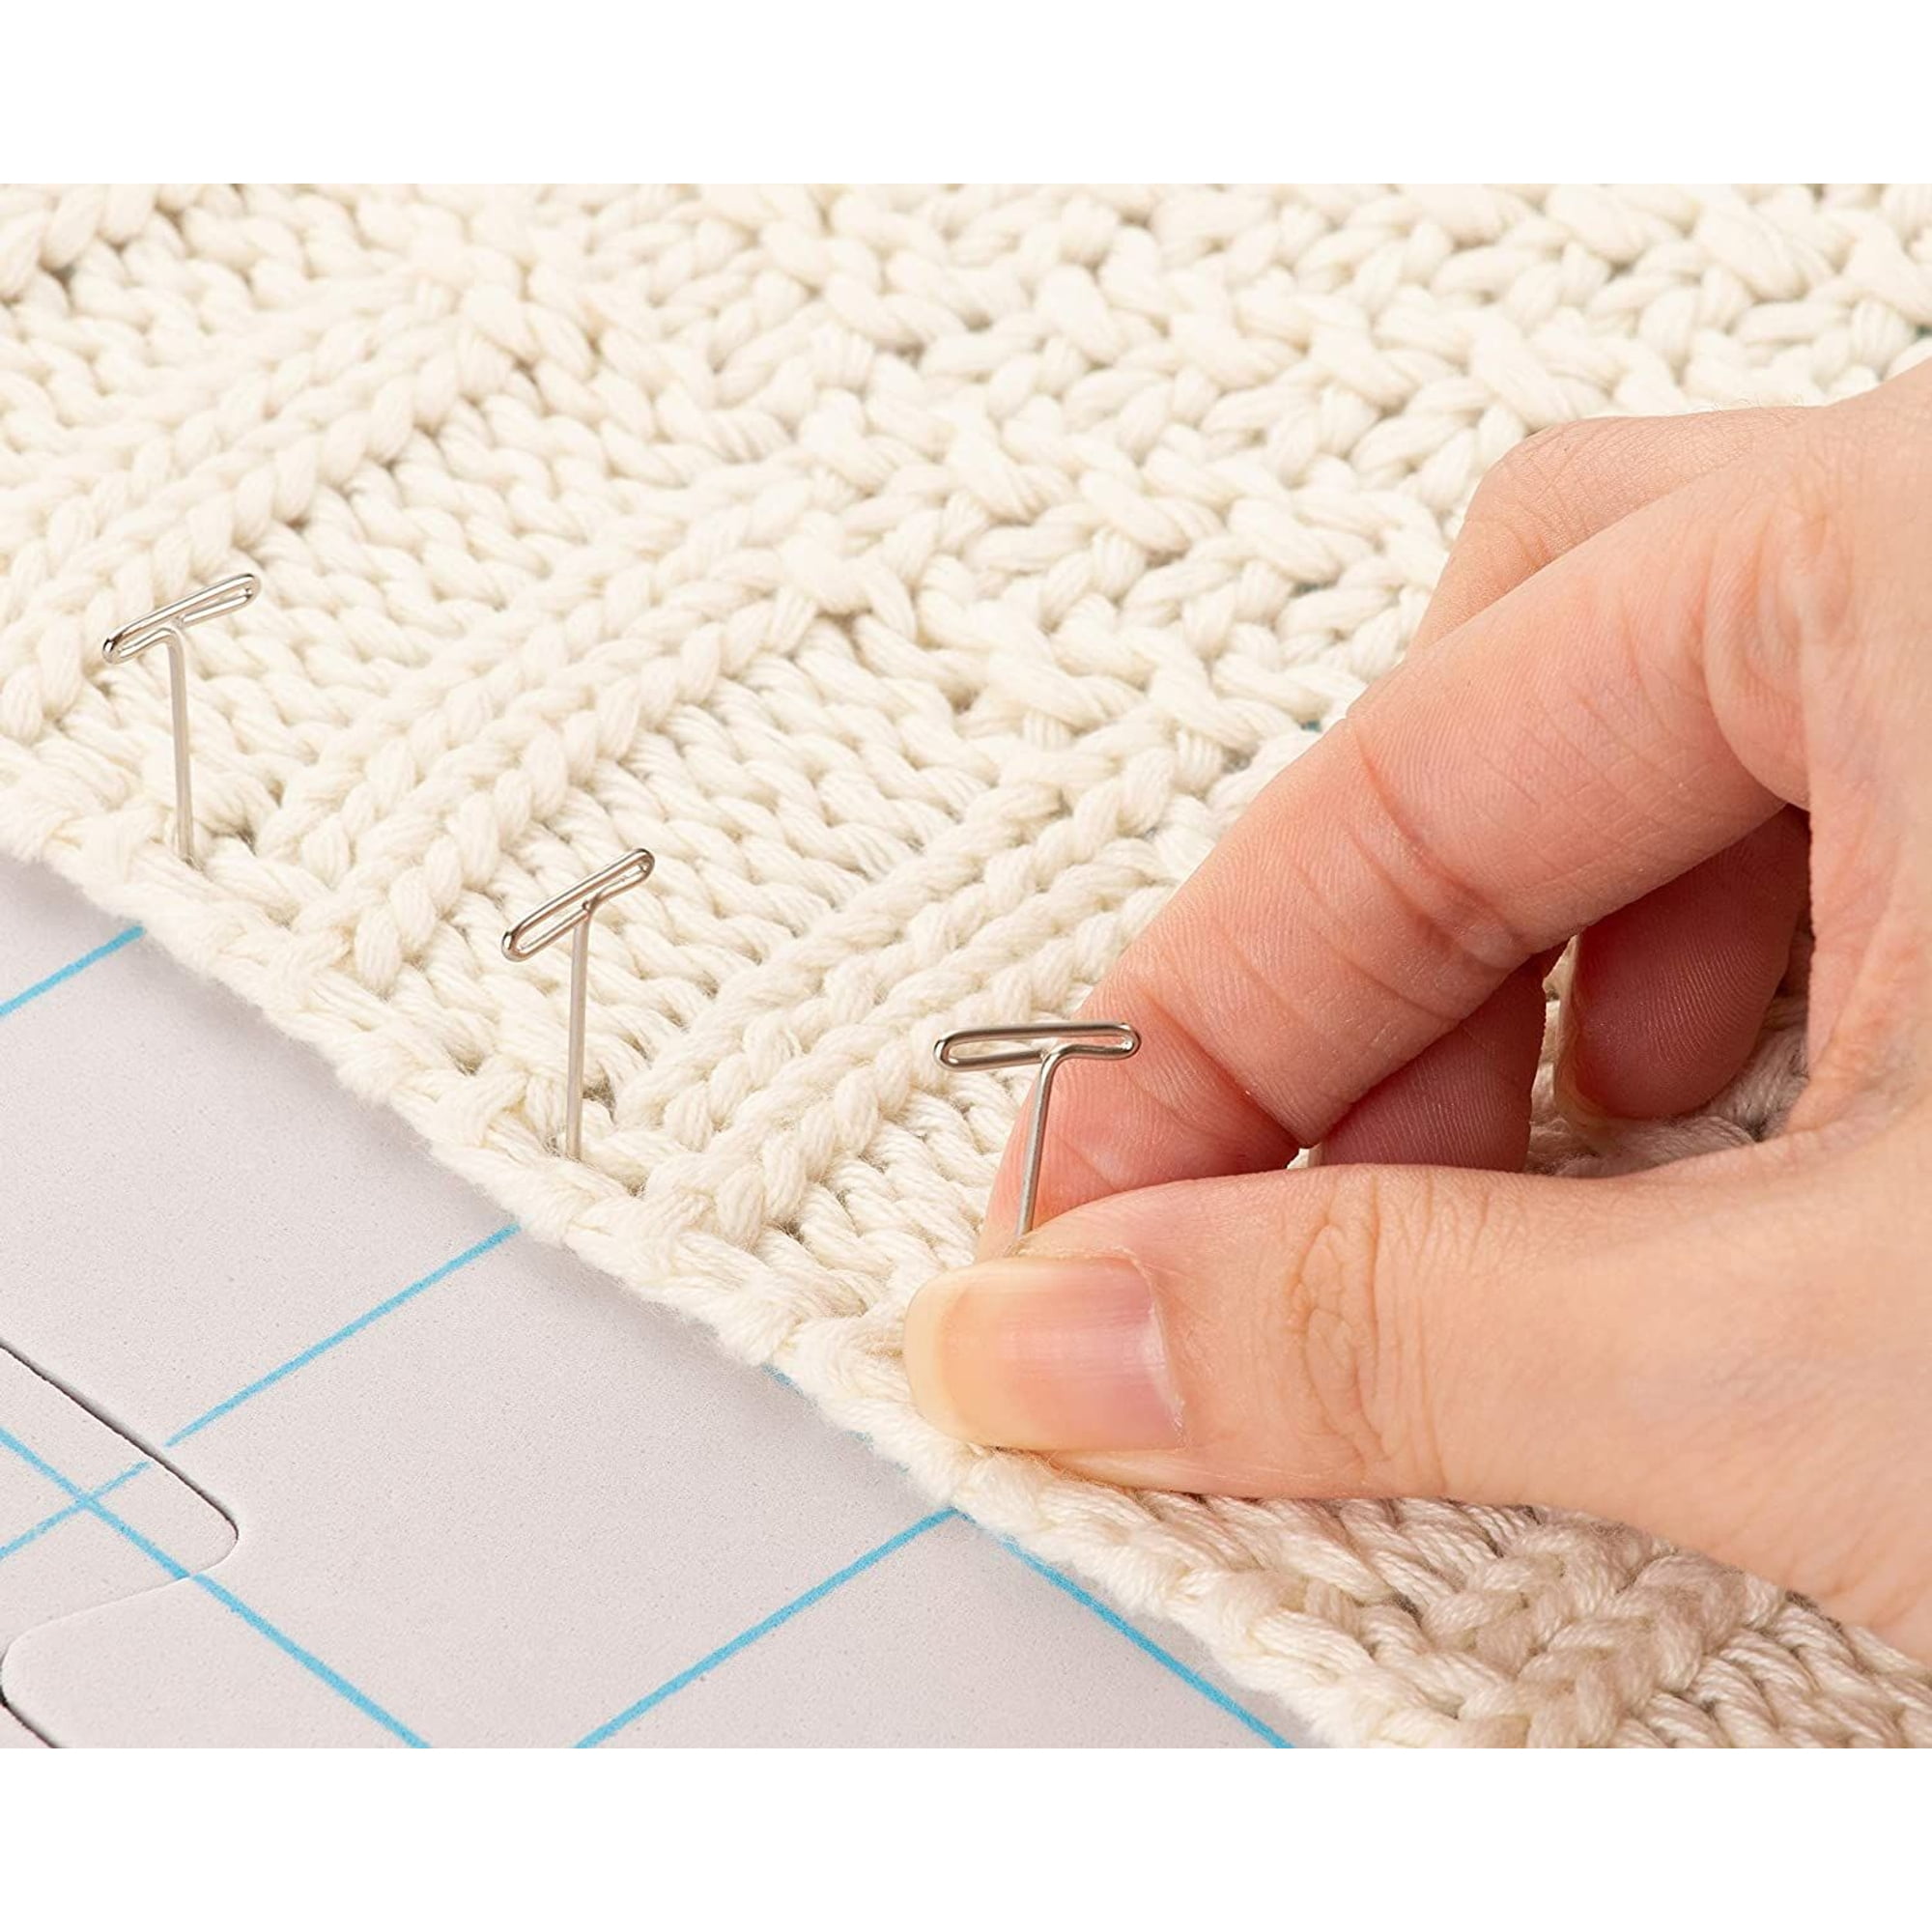 Juvale Blocking Mats for Knitting & Crochet 9 Pack with 200 T Pins and Storage Bag (12.5 in)